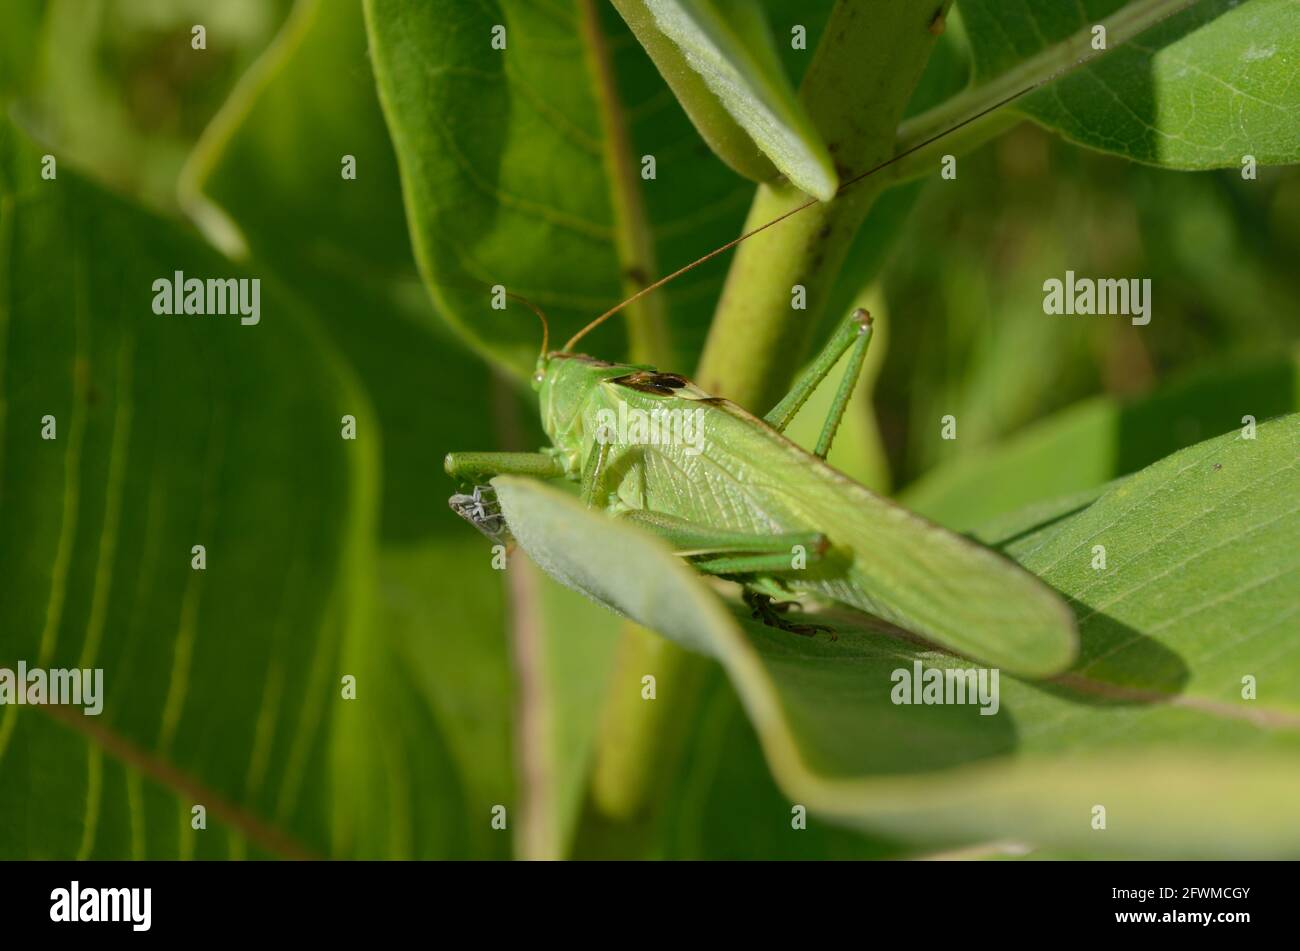 A green grasshopper on a large leaf of grass, in its natural environment. Stock Photo